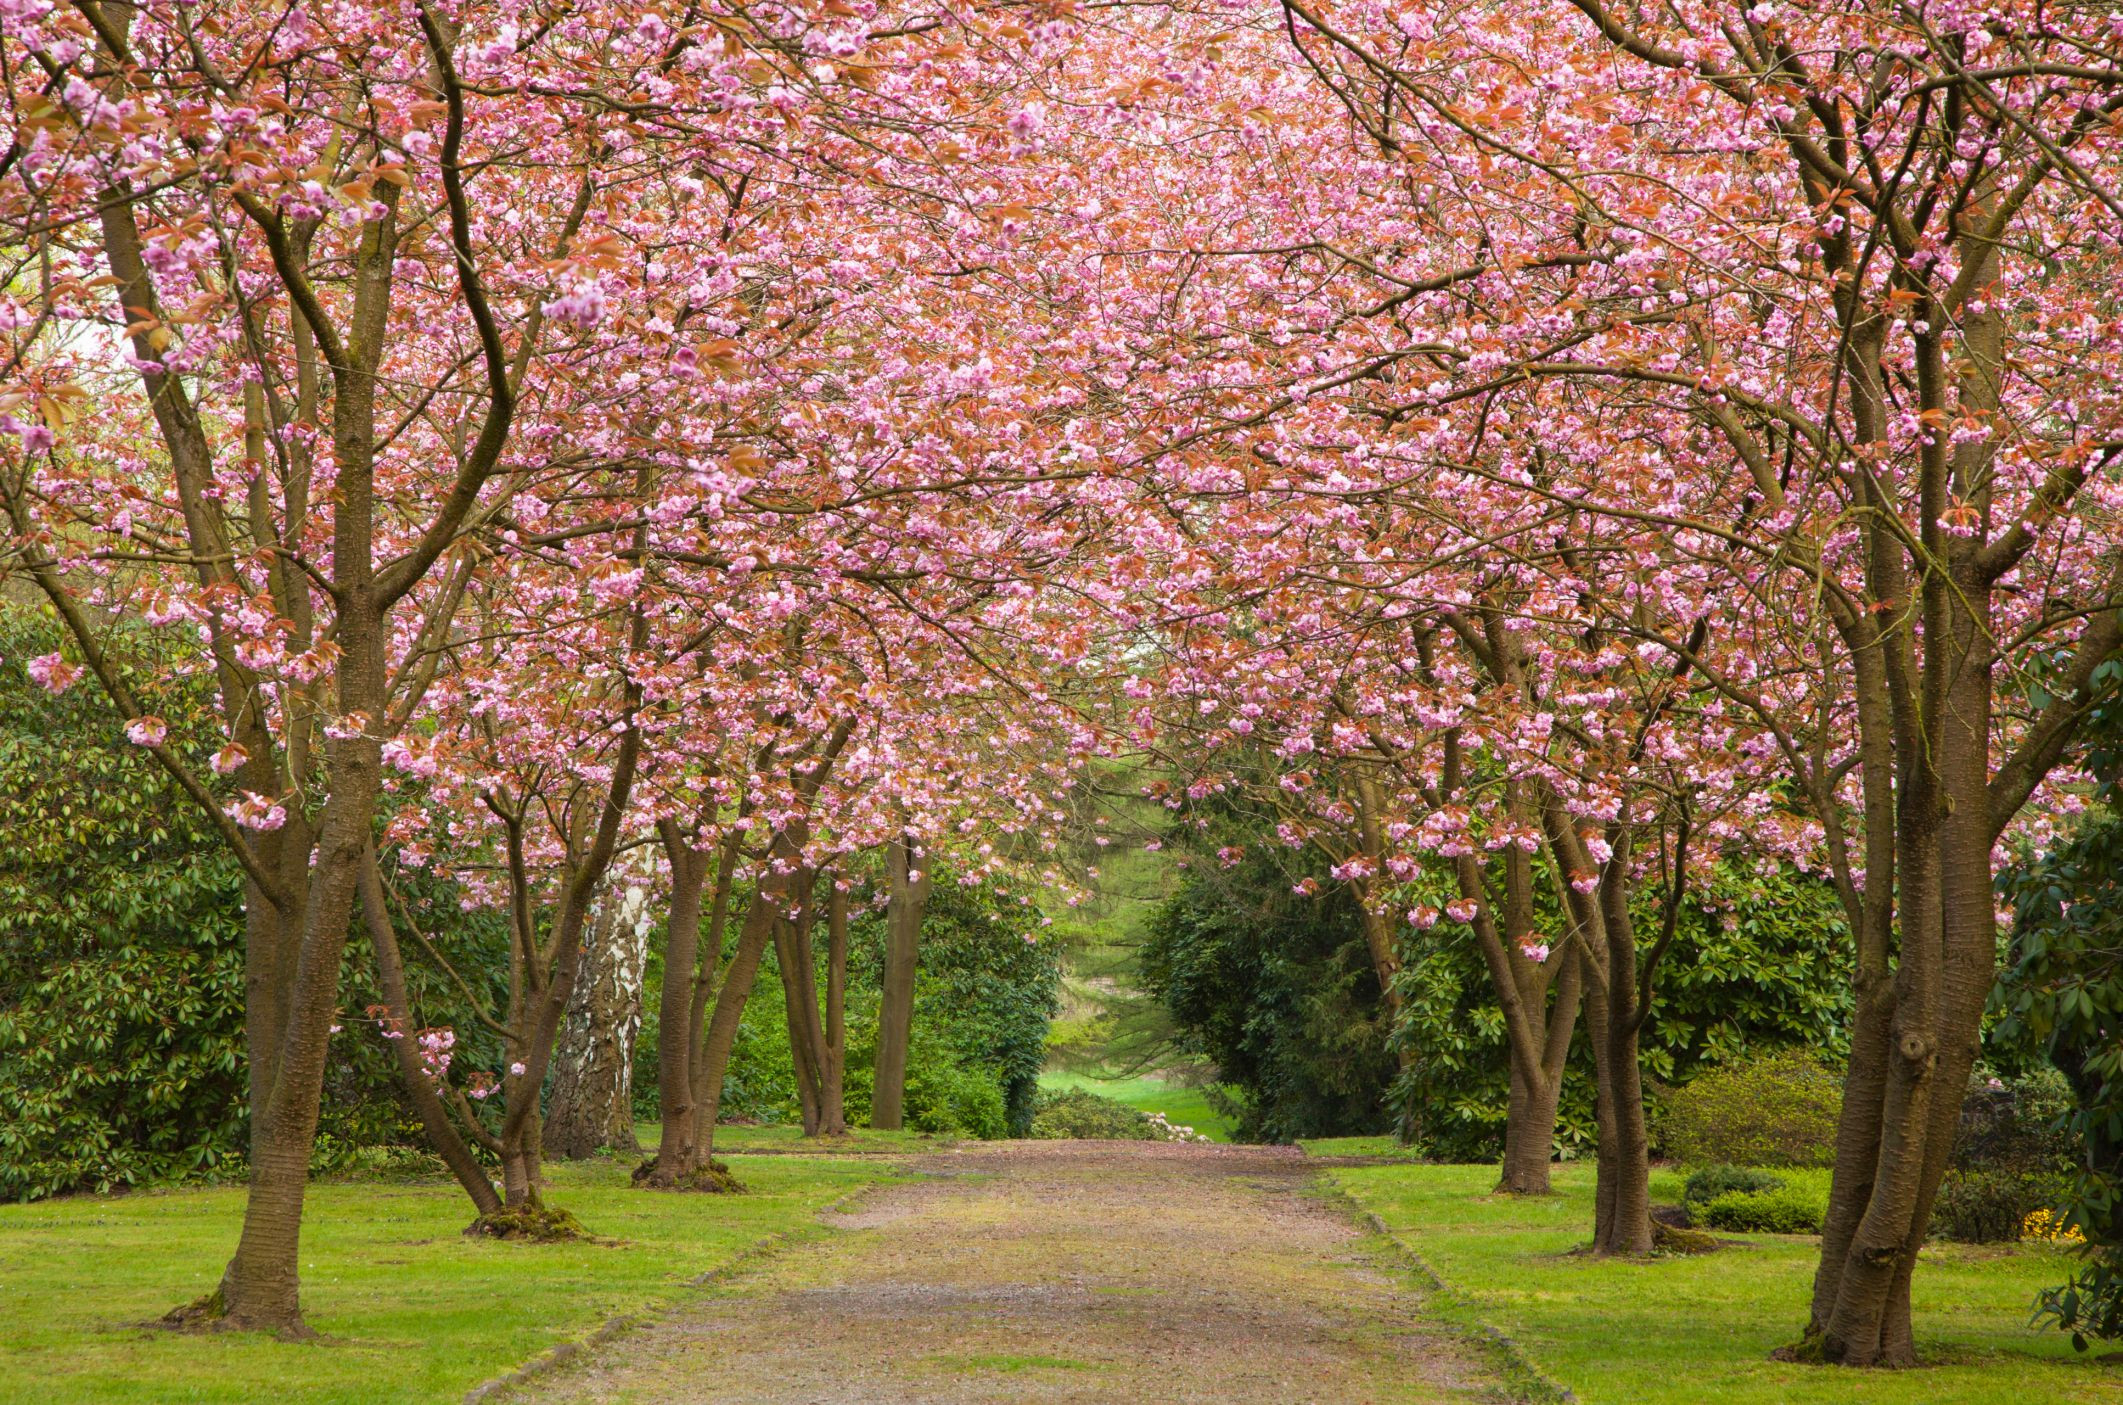 25 Cherry Blossoms Facts - Things You Didn'T Know About Cherry